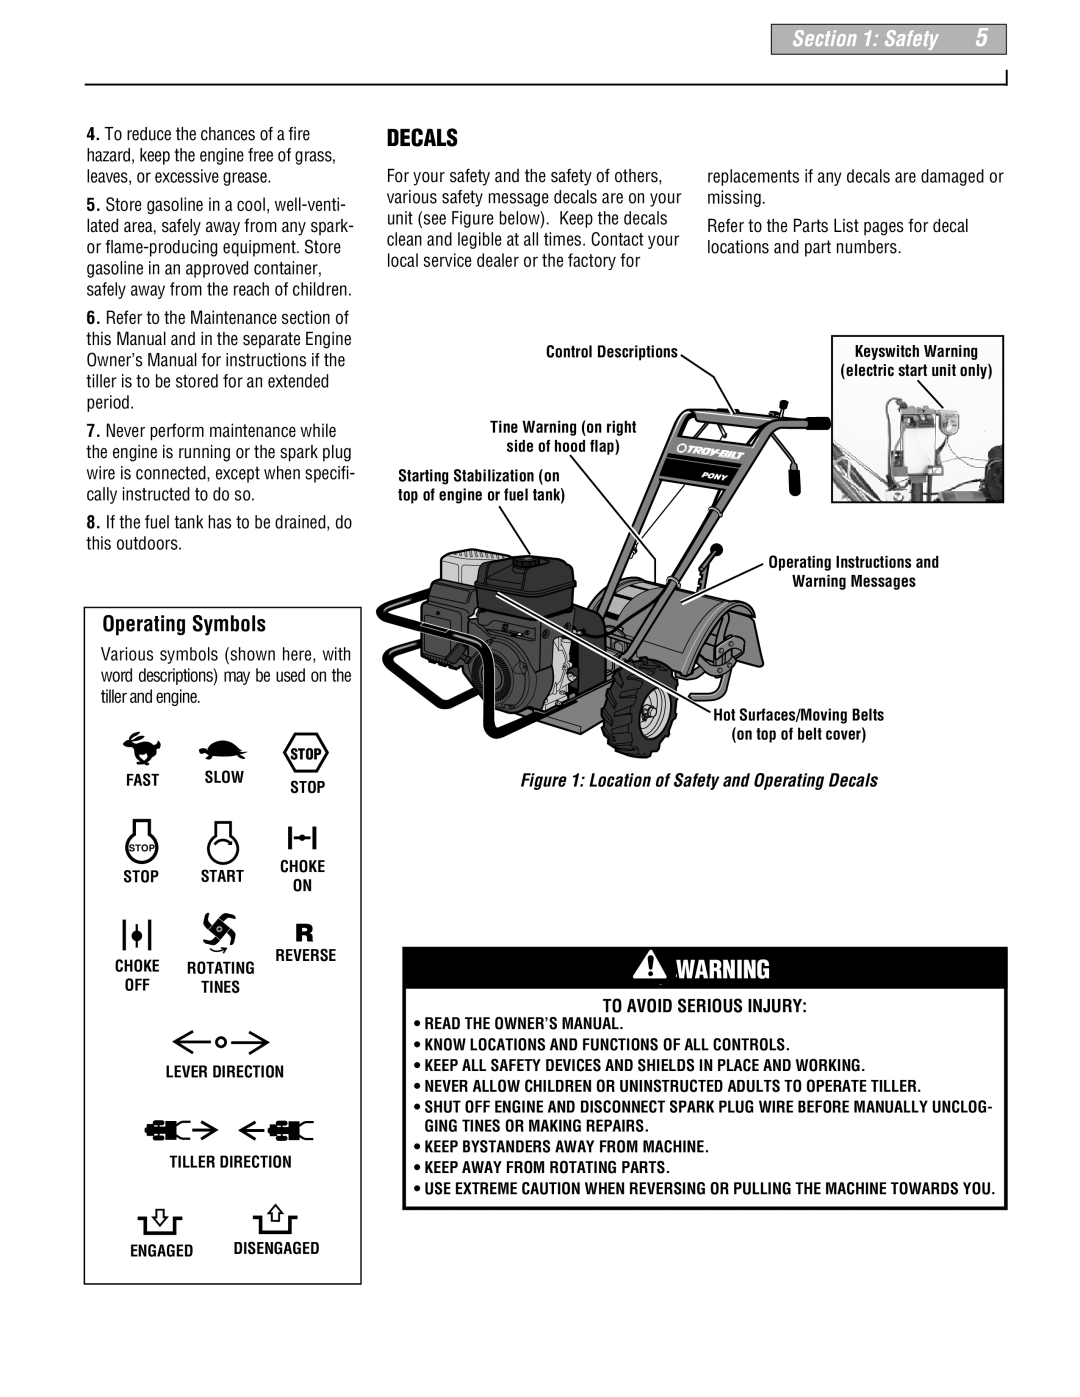 Troy-Bilt 664D-Pony manual Operating Symbols, Location of Safety and Operating Decals, To Avoid Serious Injury 